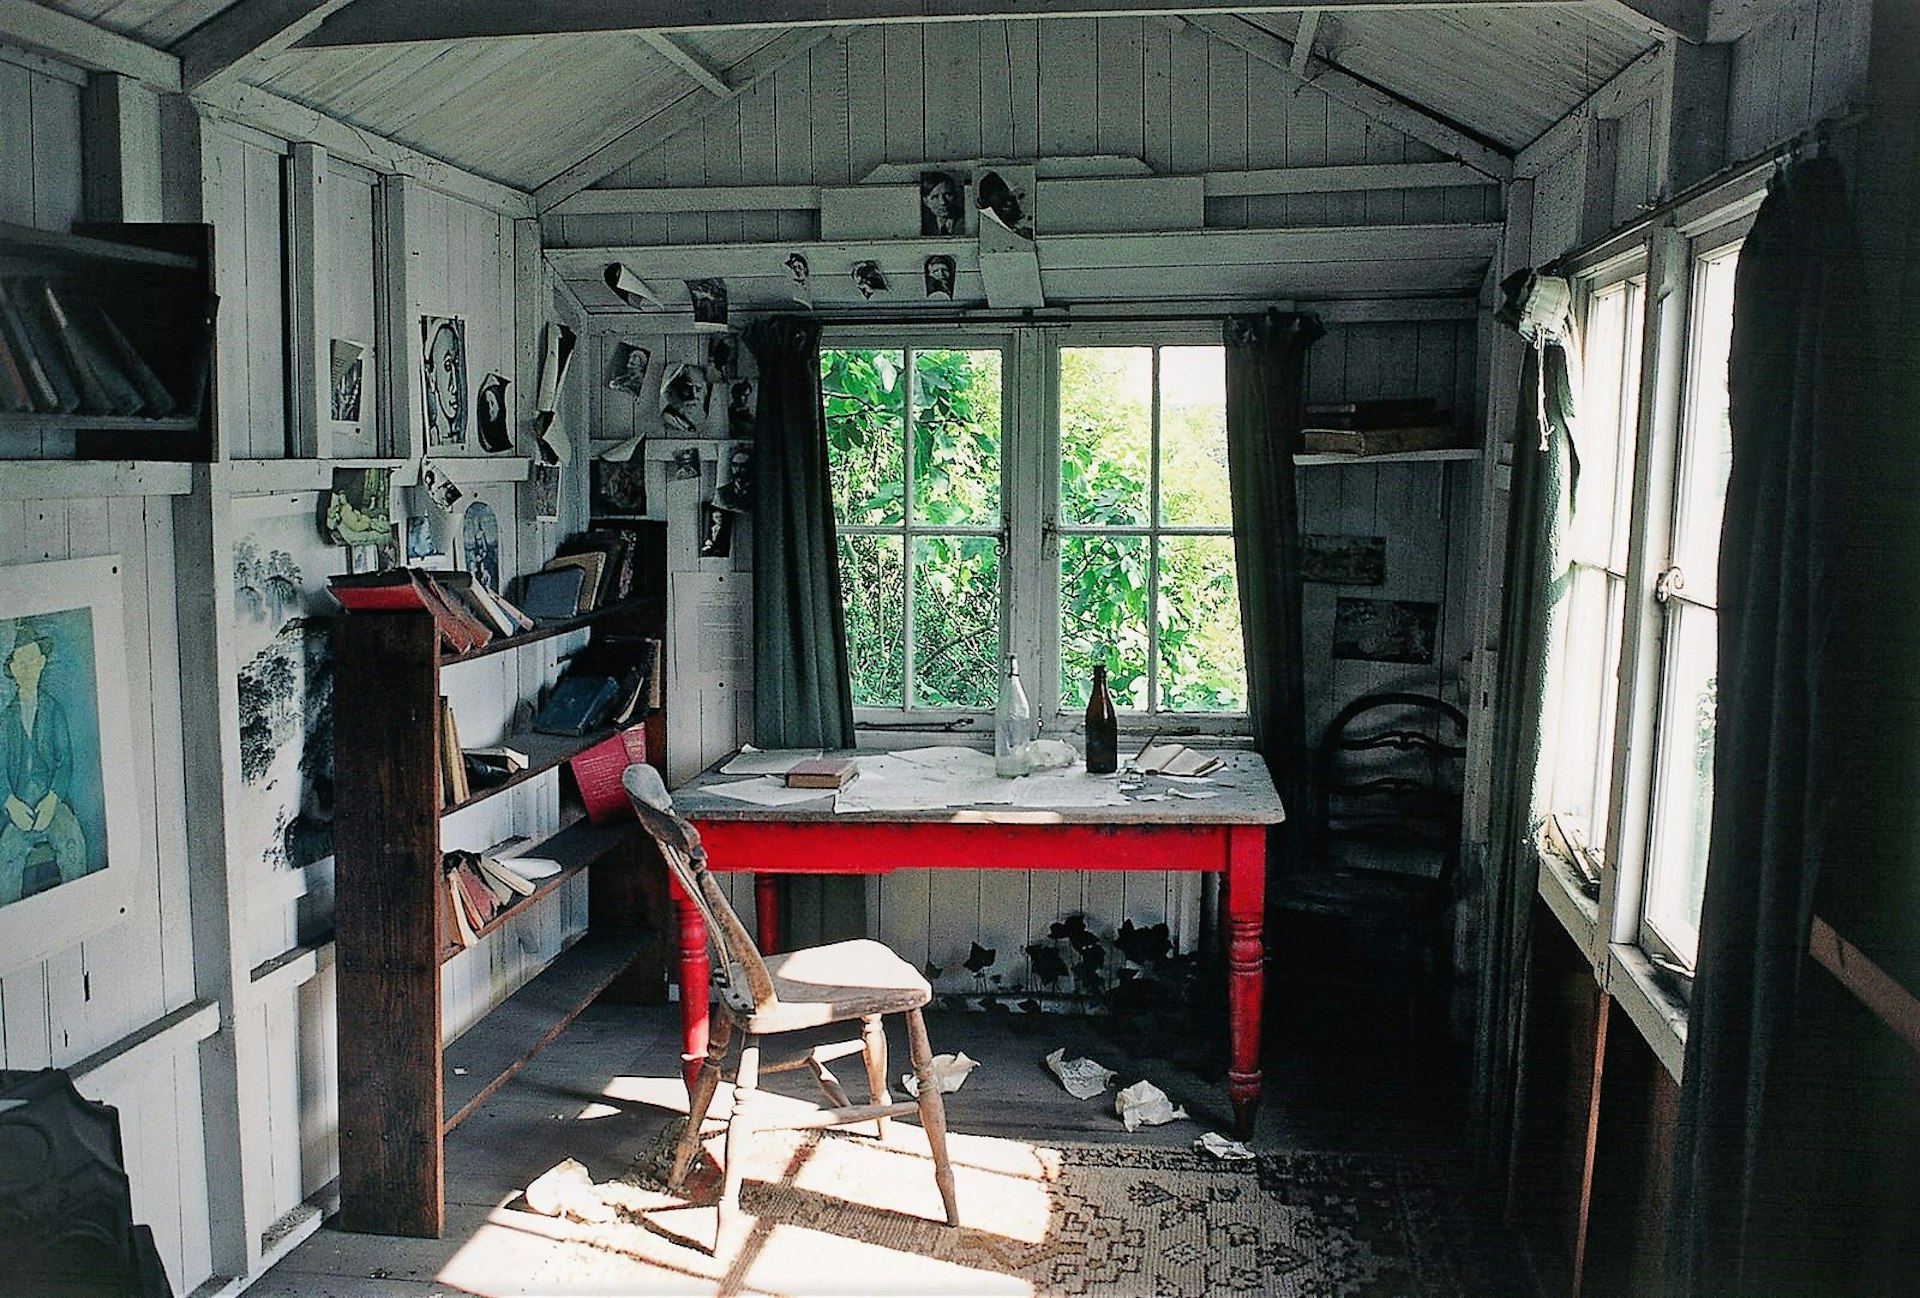 Interior of the Boathouse where writer Dylan Thomas used to work © De Agostini / G. Wright / Getty Images